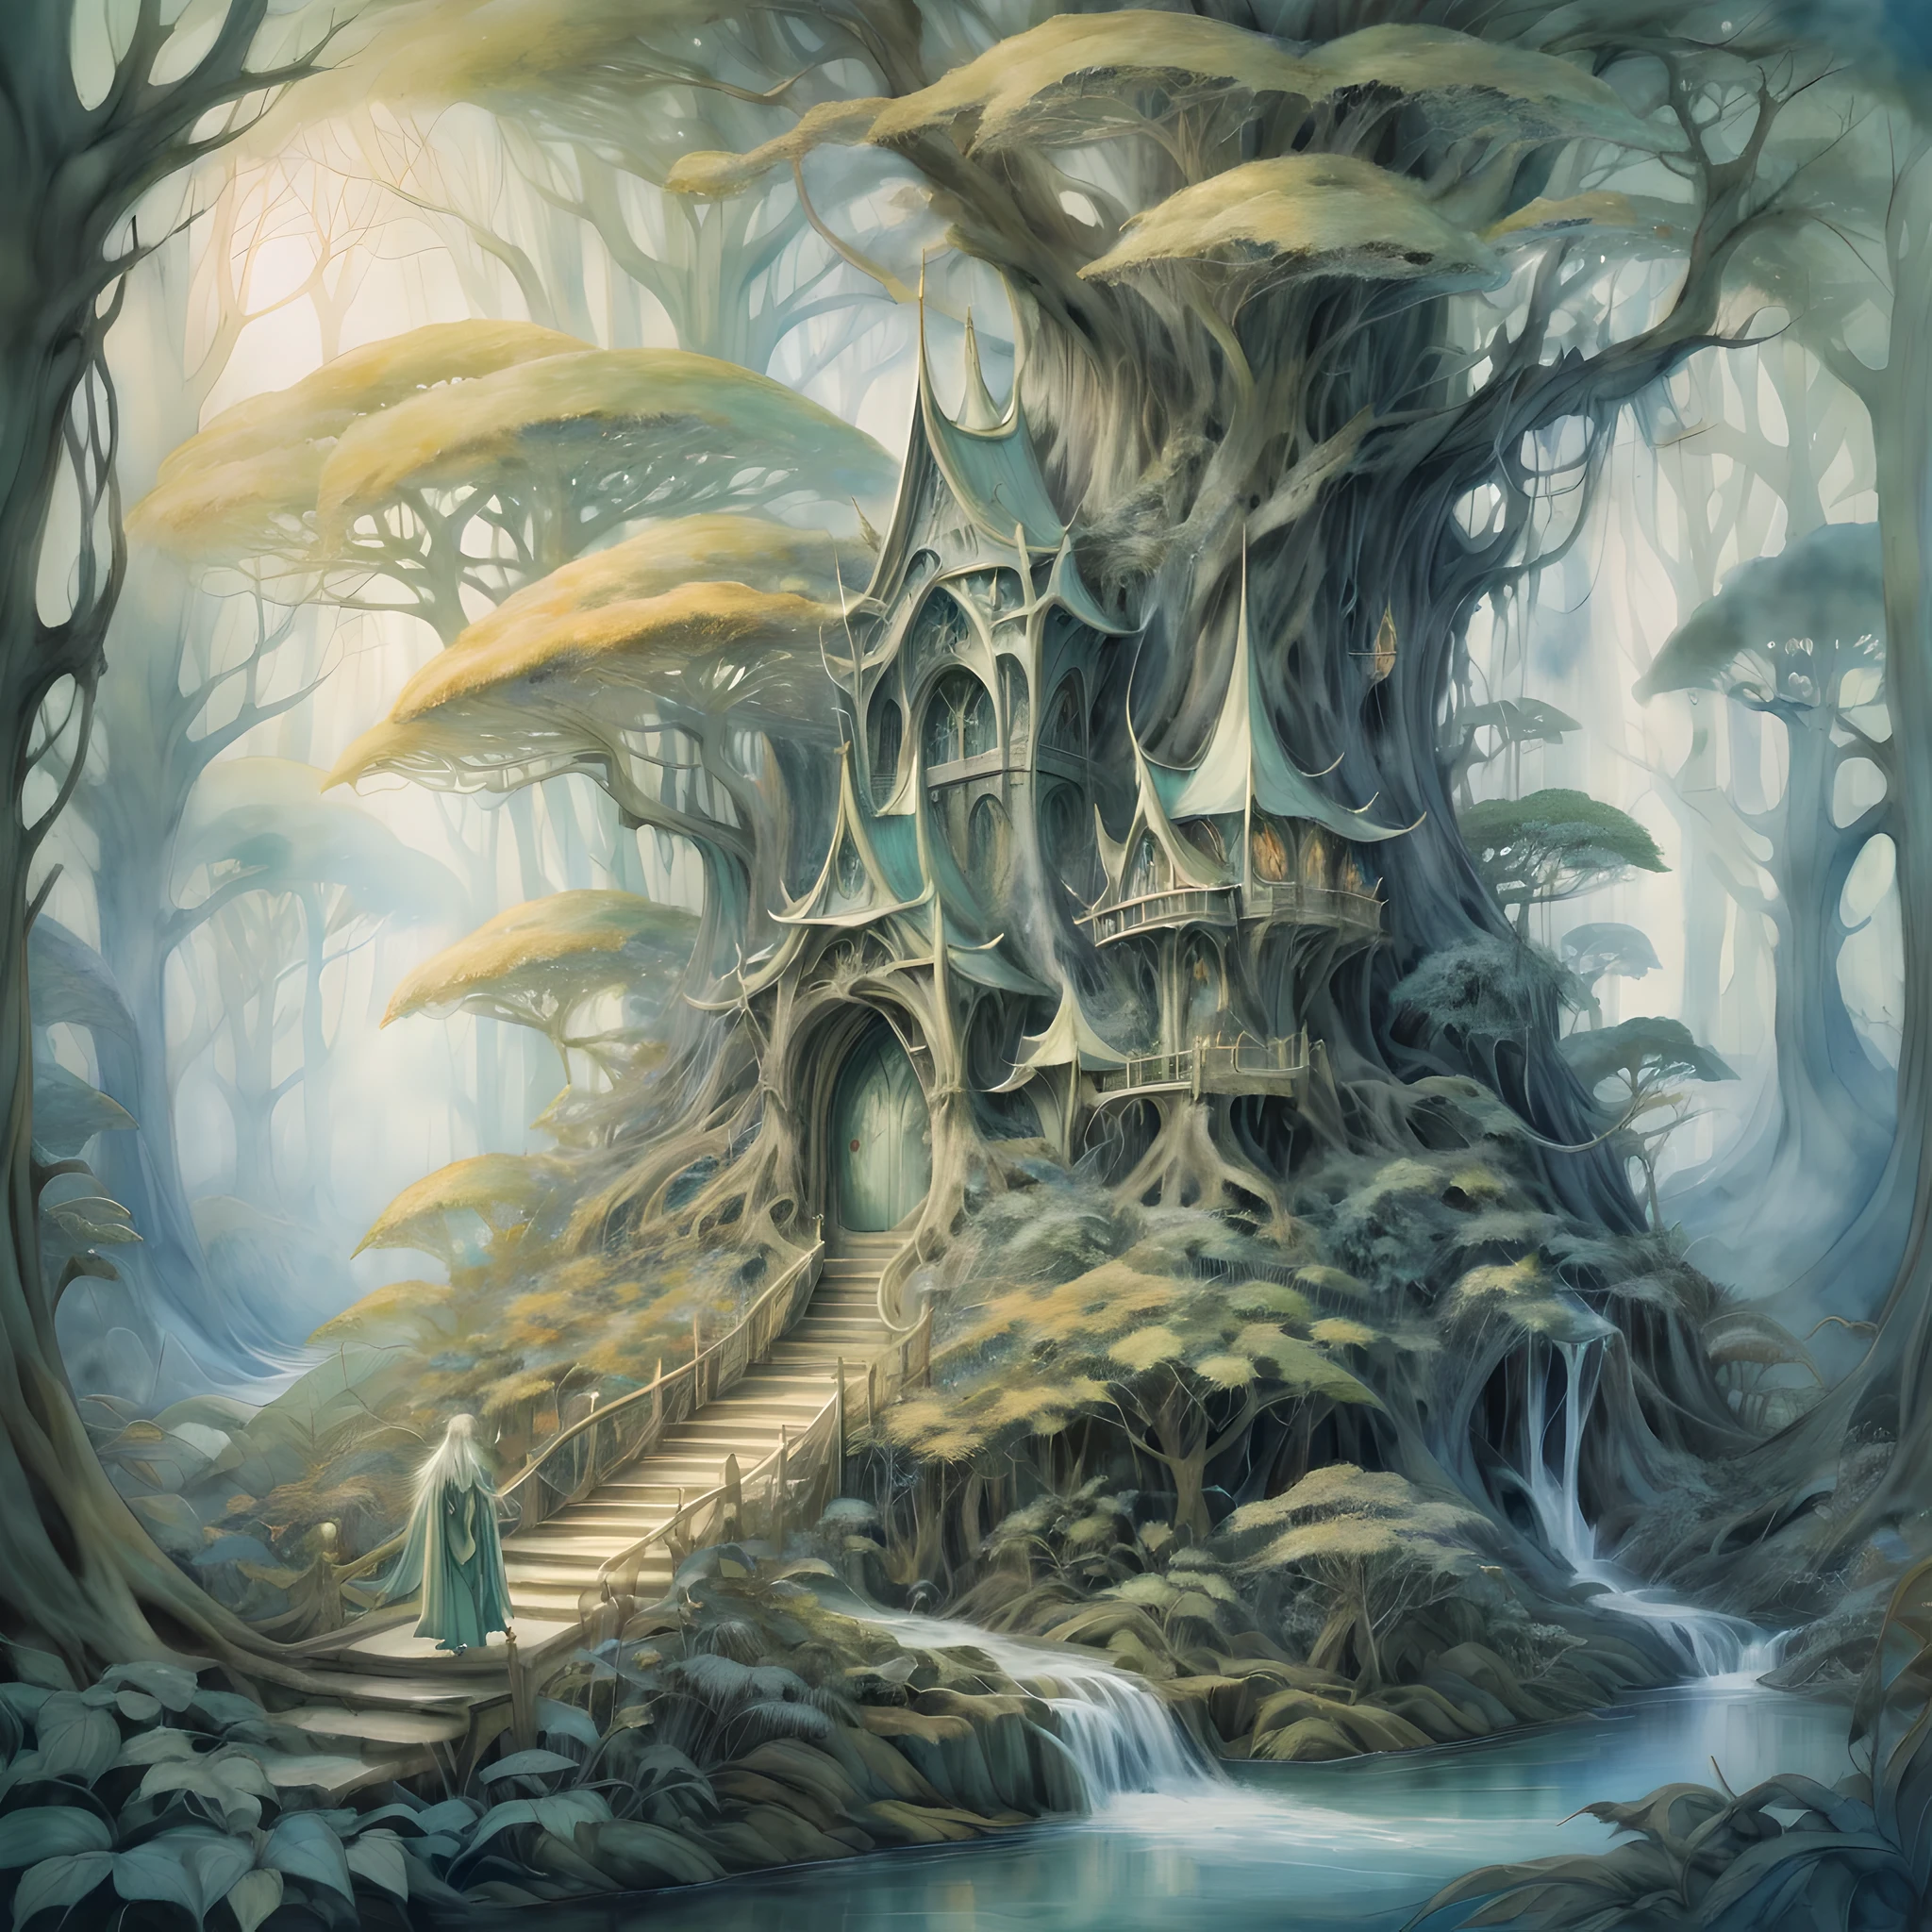 Elven Forest Haven, where slender, silver-haired elves engage in enchanting activities among towering, luminescent trees. Painted in a Watercolor style inspired by the dreamlike works of Brian Froud and Alan Lee, featuring soft color transitions and intricate detailing reminiscent of classic fantasy art.